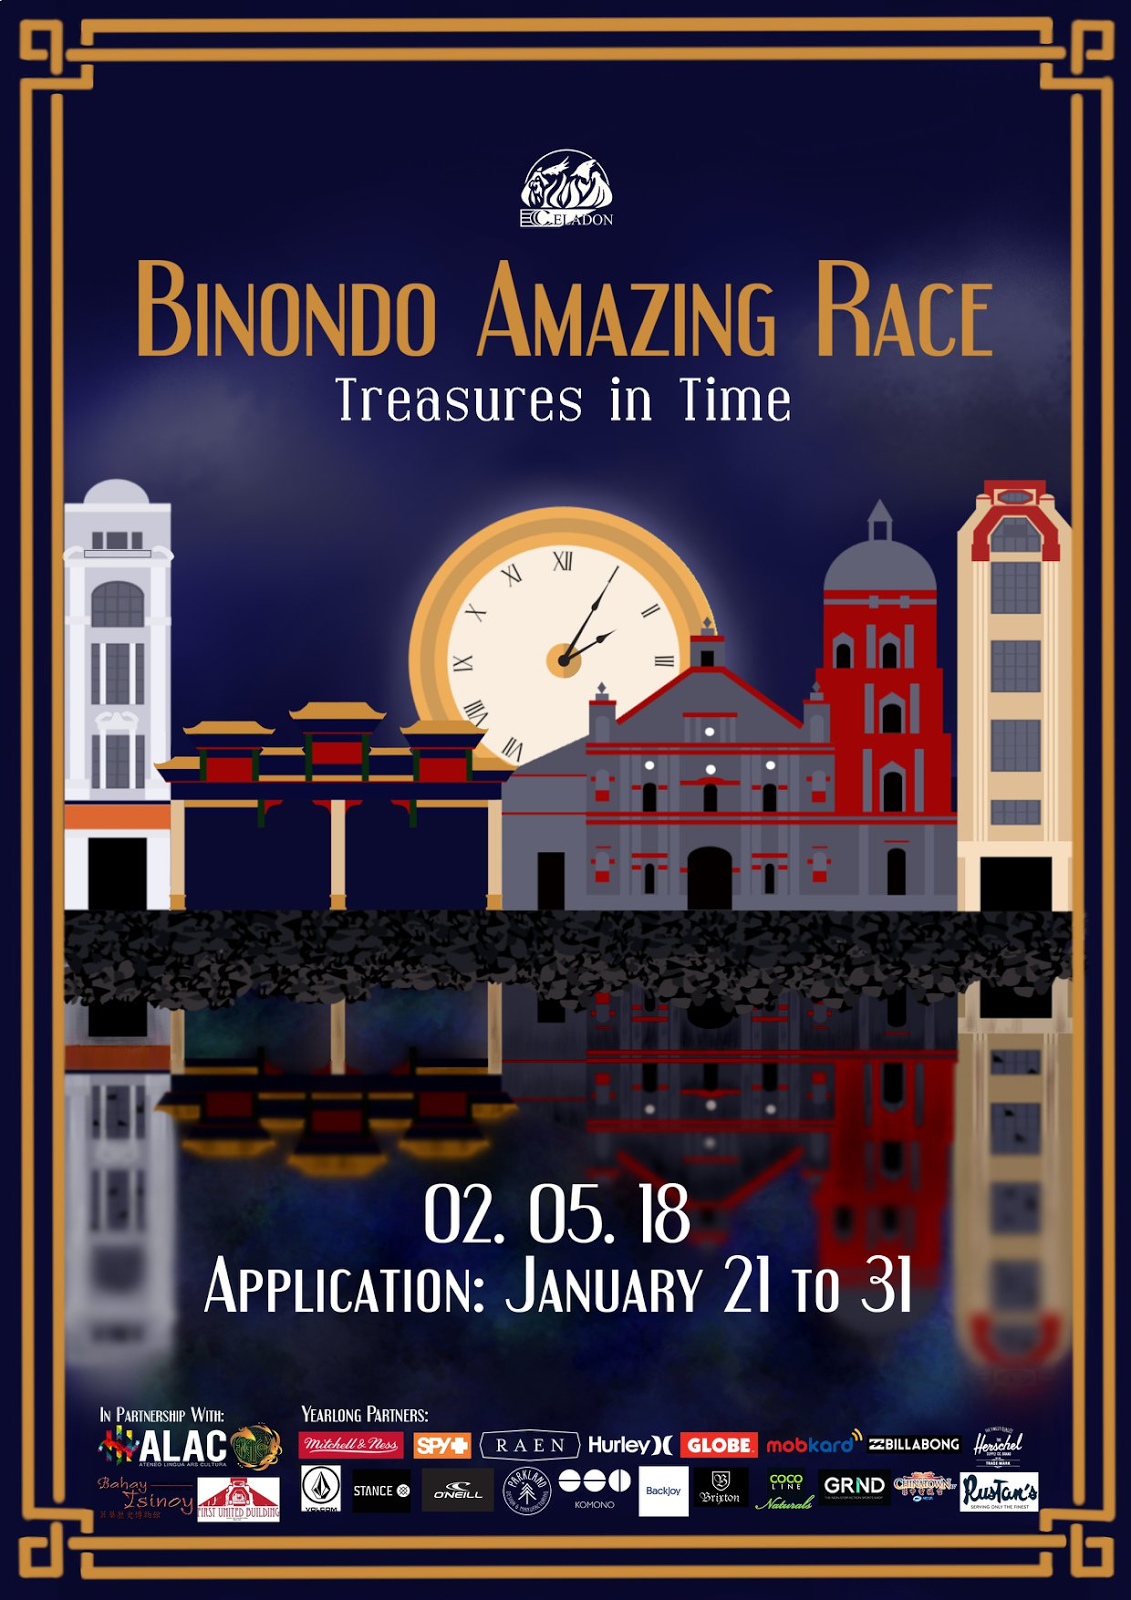 A Race Through Treasures In Time: Binondo Amazing Race From Then to Now